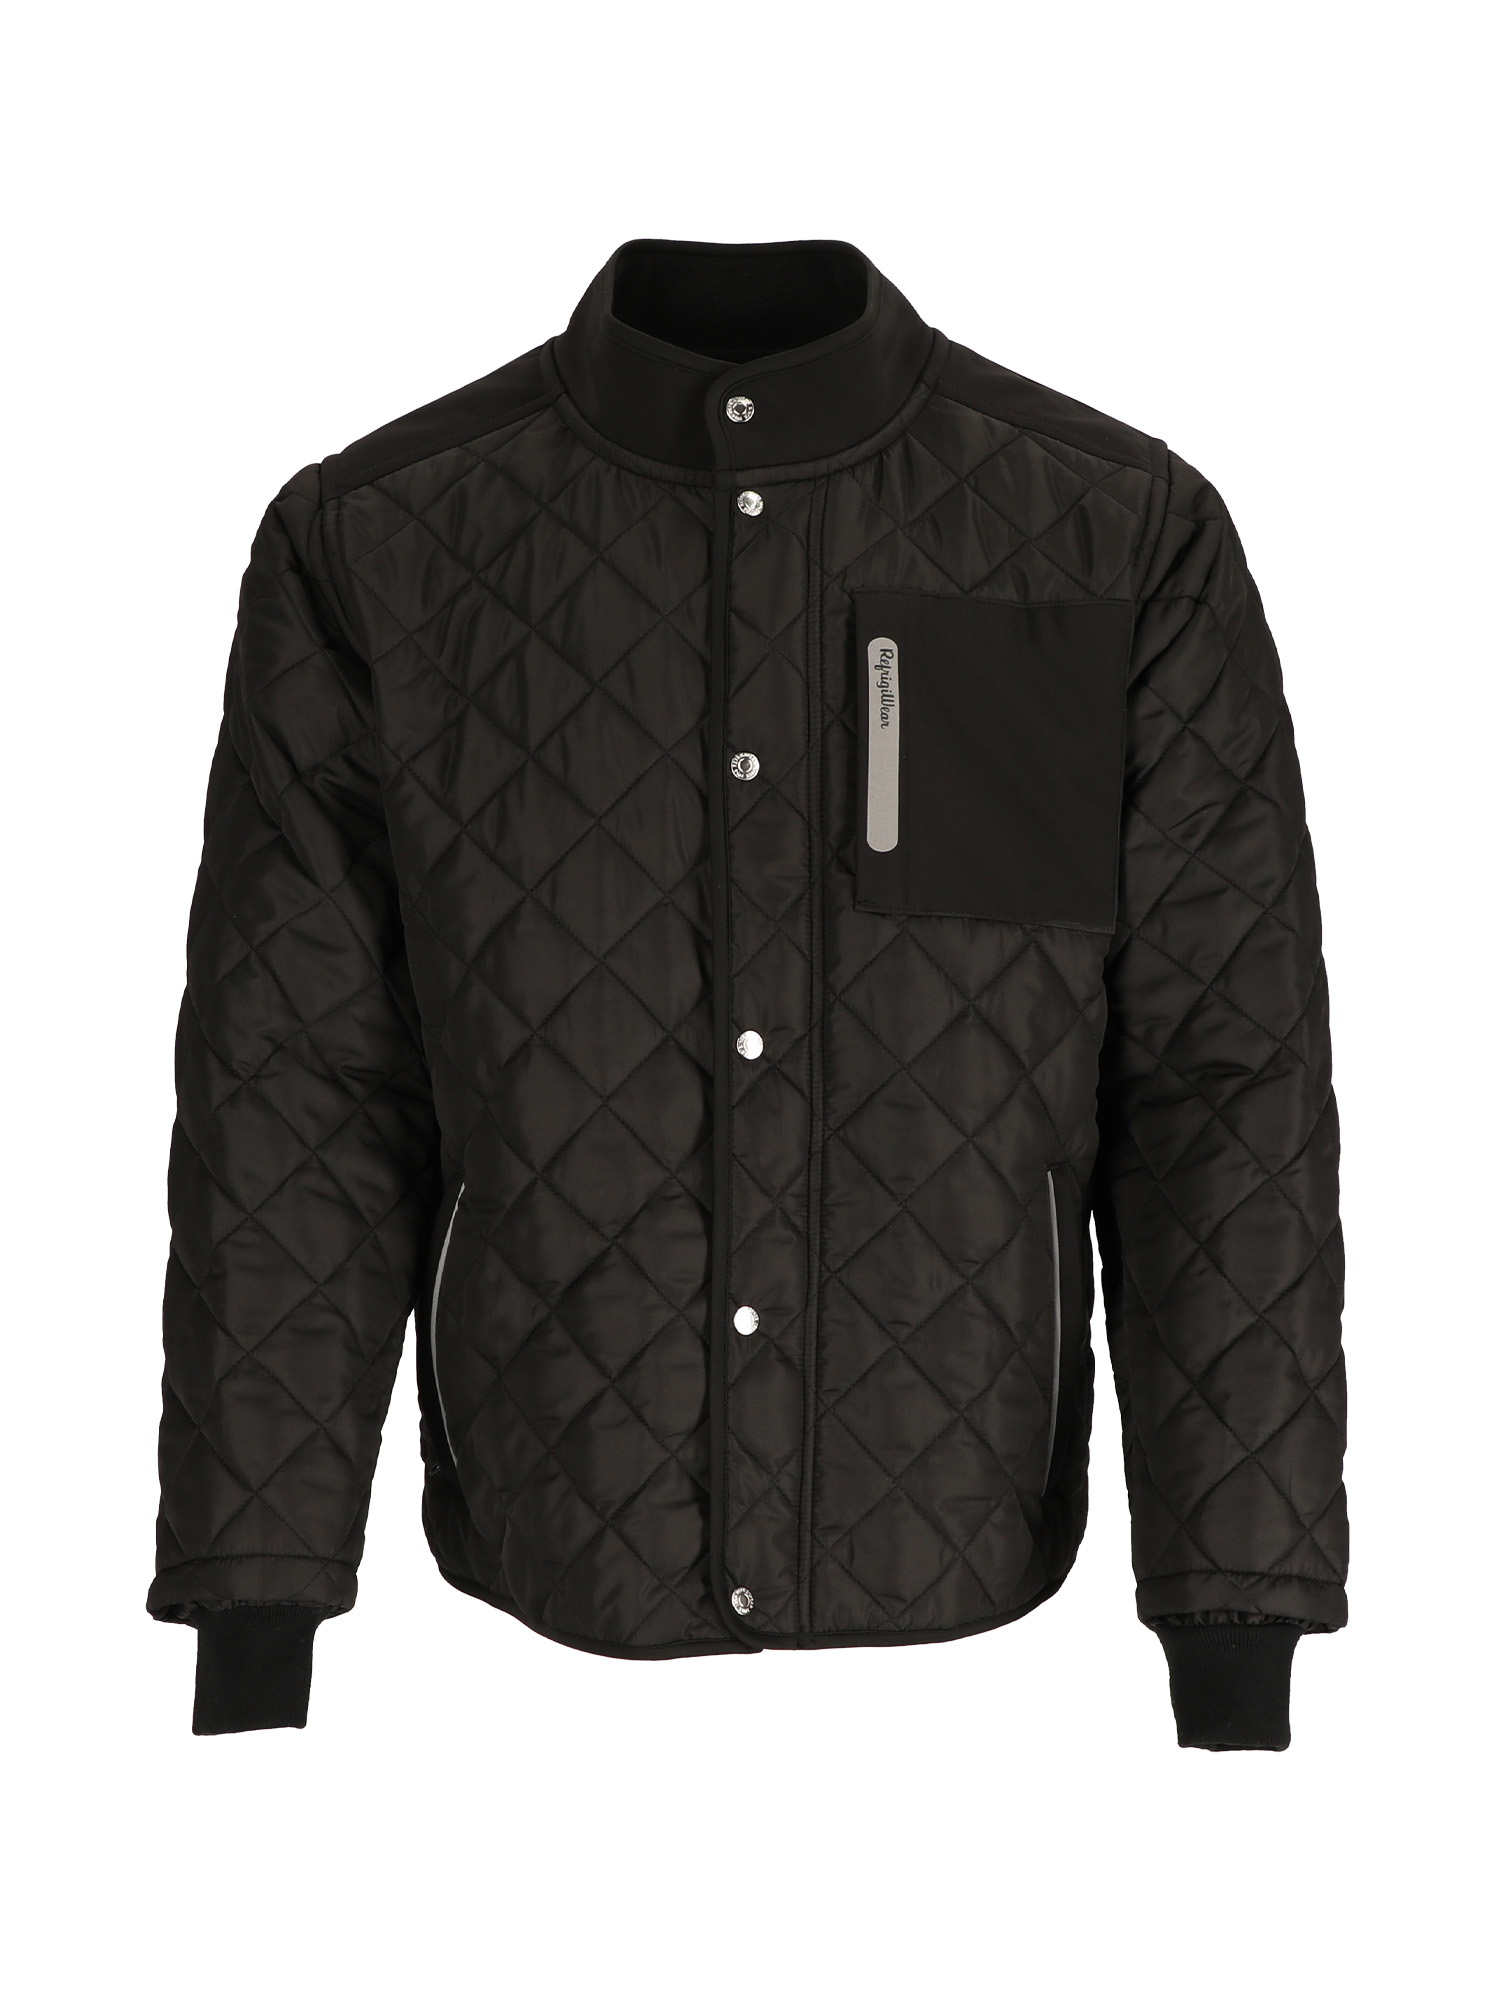 RefrigiWear Insulated Diamond Quilted Jacket | Black | Fit: Big & Tall | 100% Polyester | XL